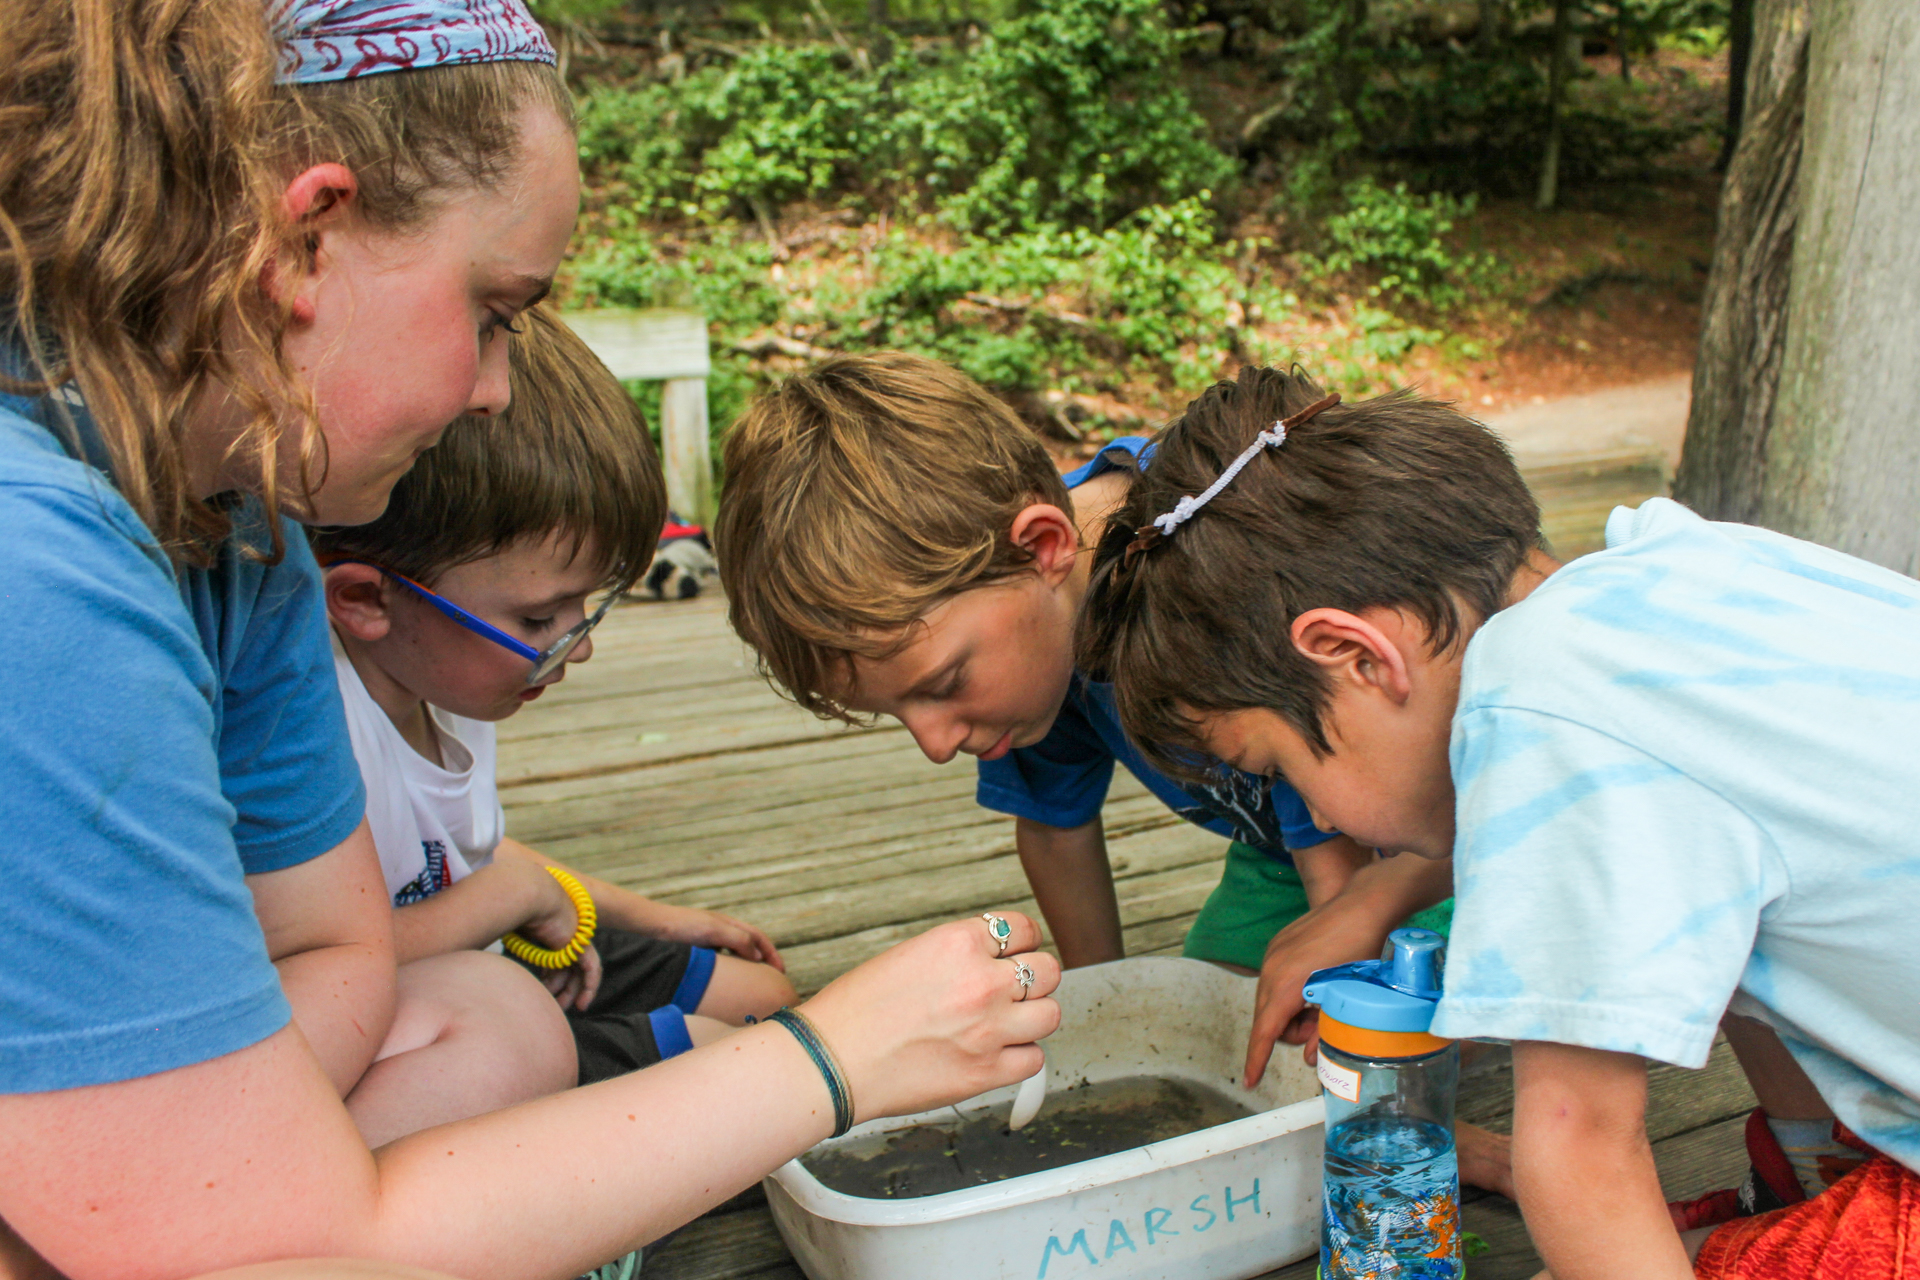 Three campers peer down into a white tub filled with water and mud that says "Marsh" on the side while a counselor gently pokes the sample with a plastic spoon